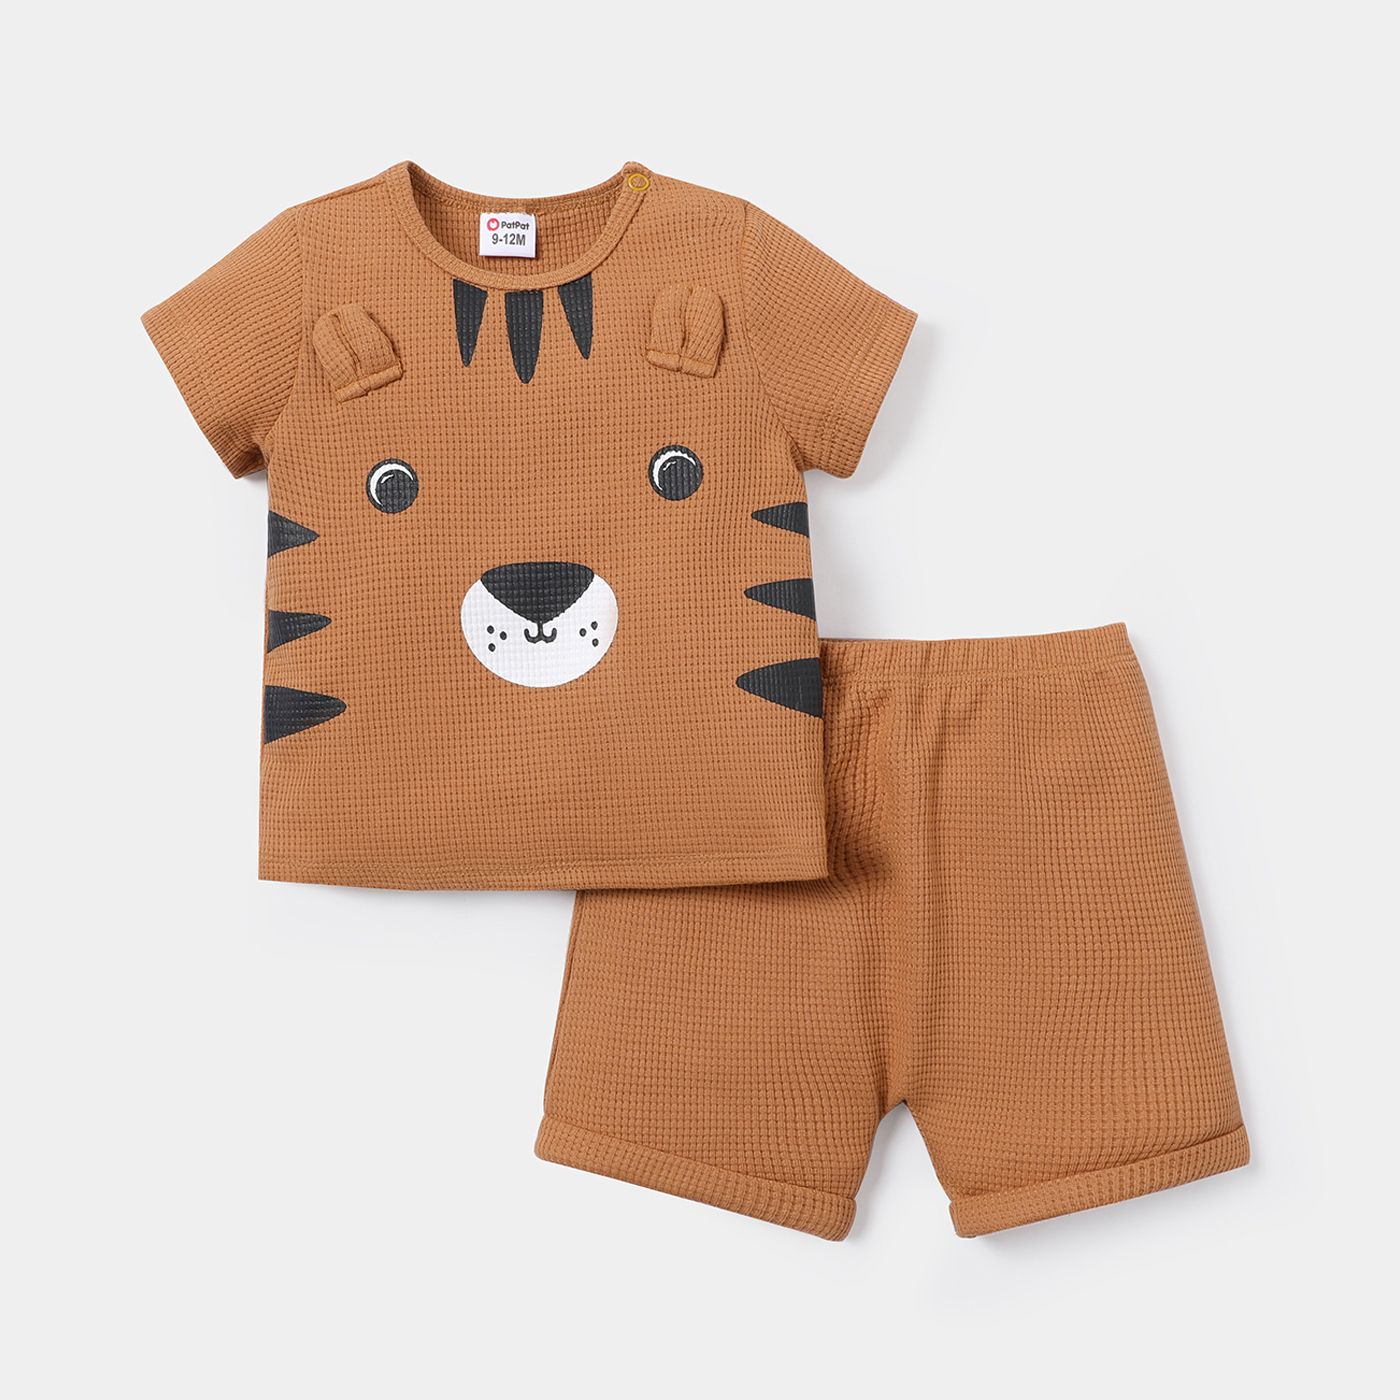 Baby Boy Sets 40% OFF Clearance Sale